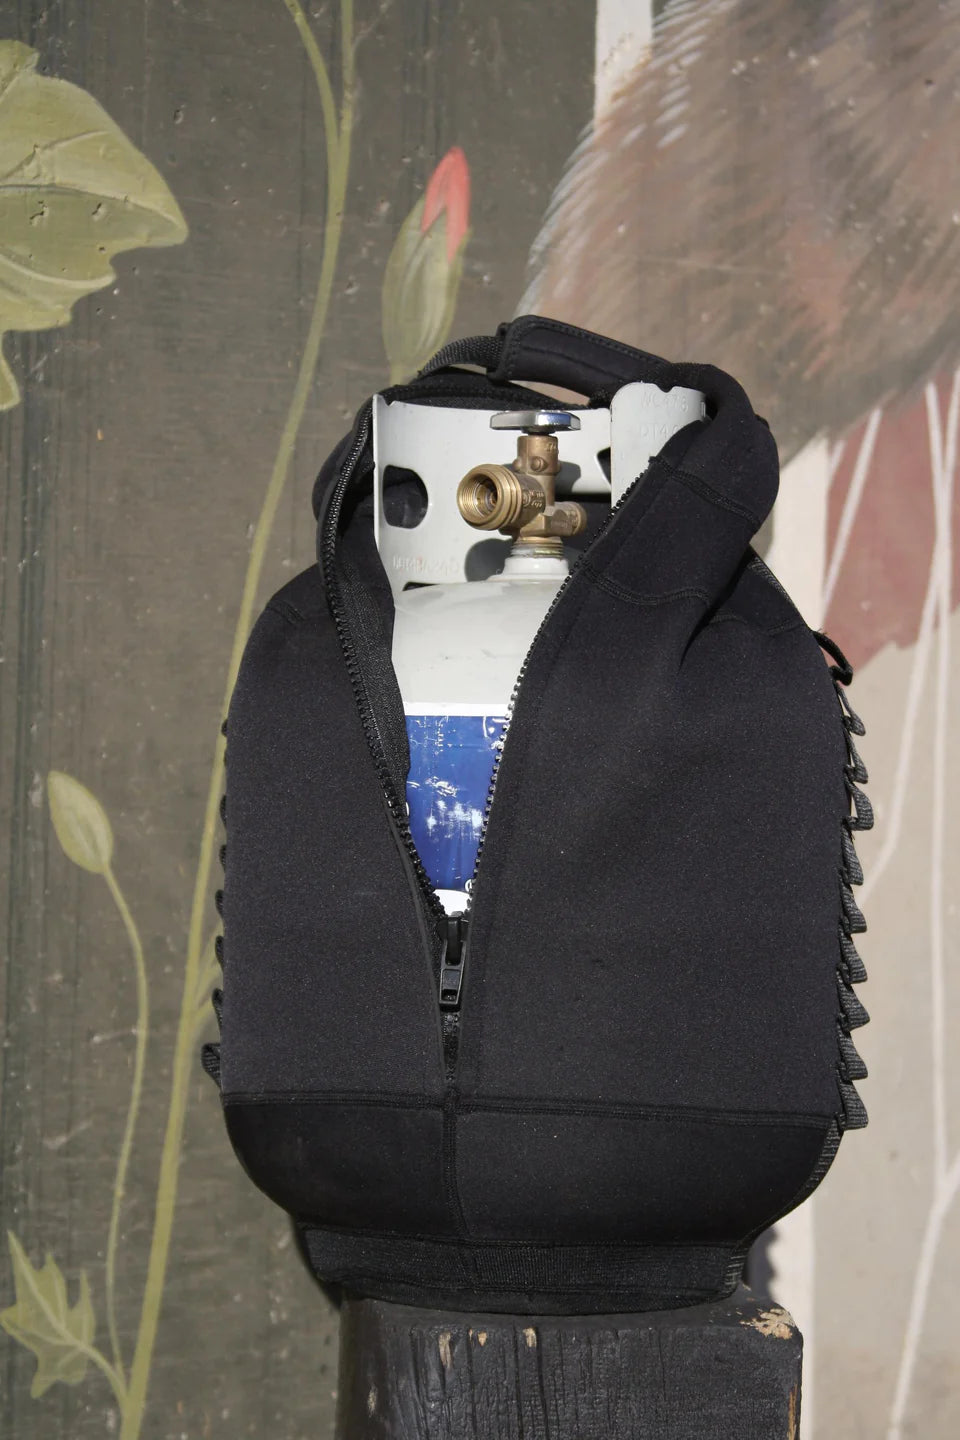 A black bag with a LavaBox Propane Tank Top on top of it, covered by a Tank Top.